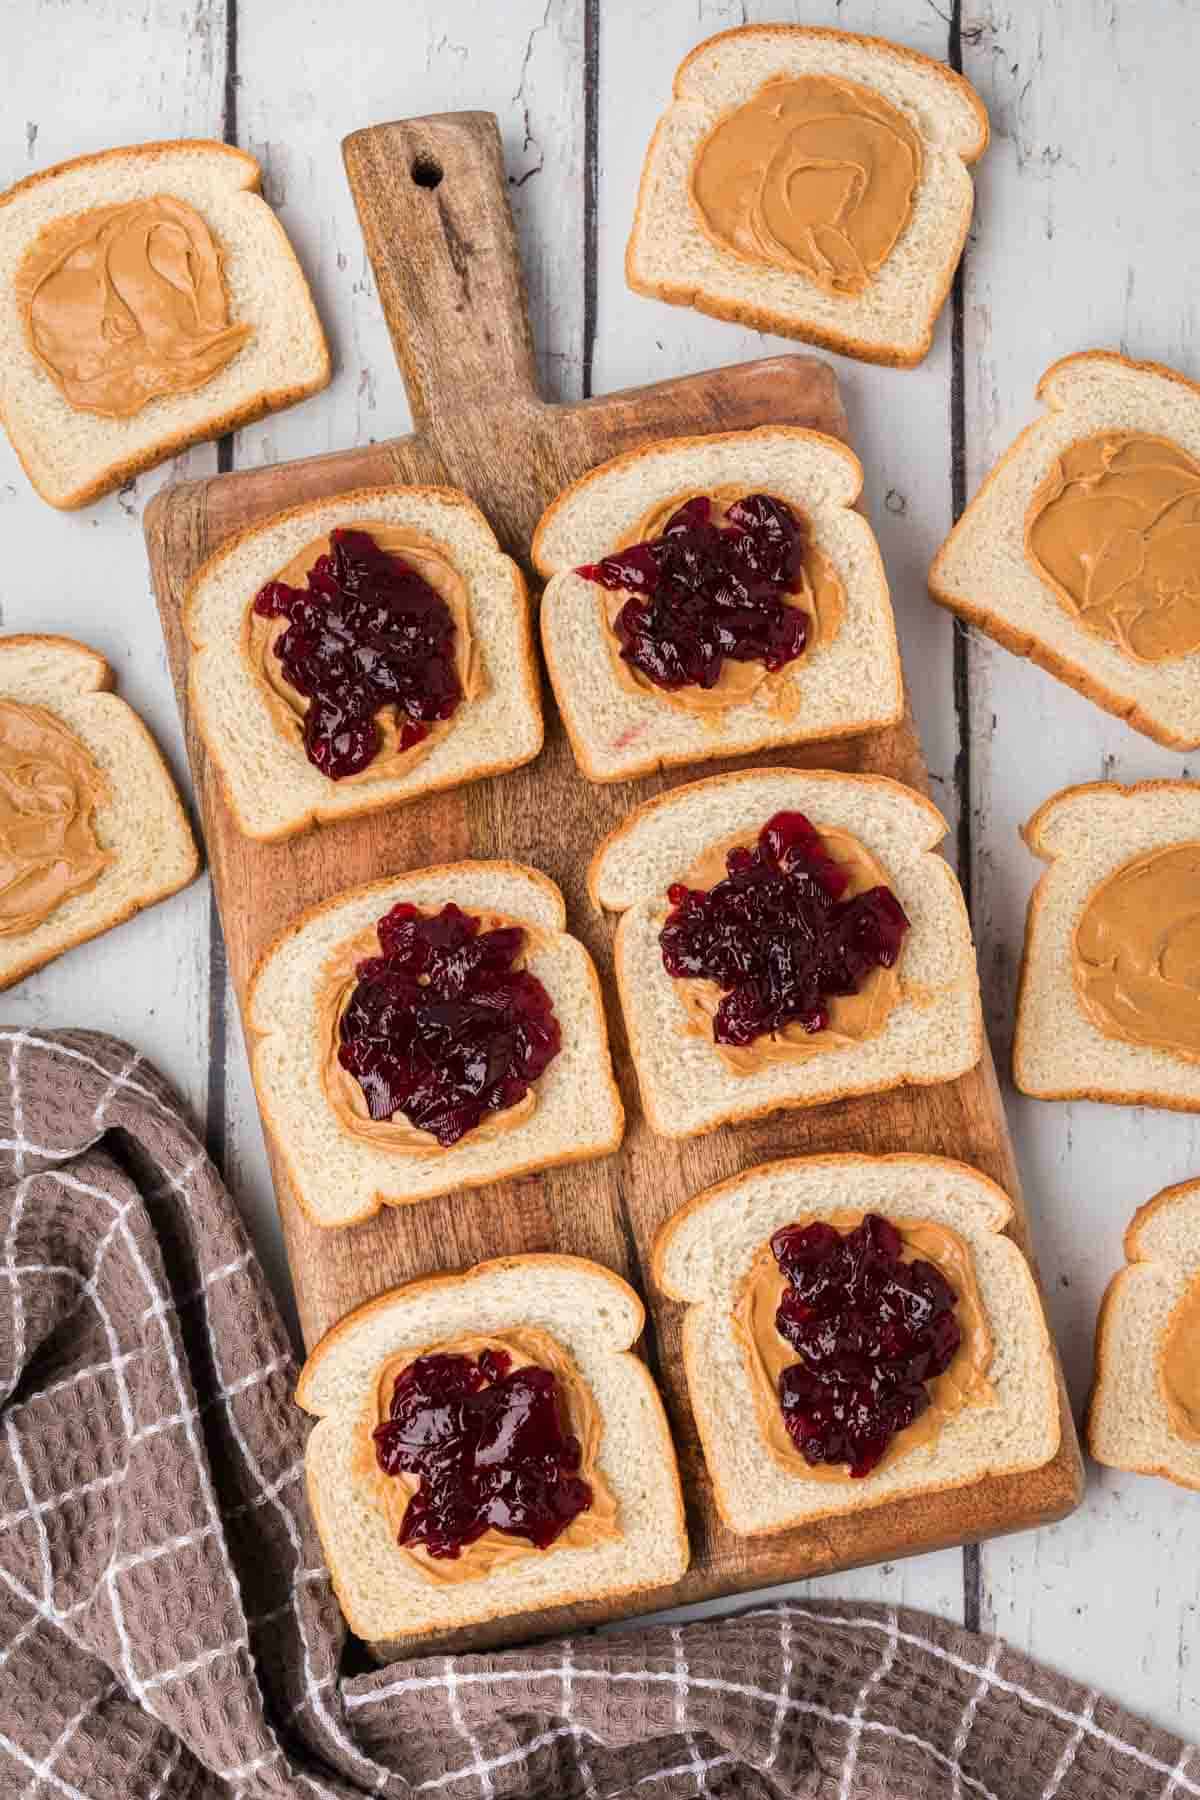 Slices of bread are placed on a wooden cutting board and surrounding surface, each topped with either peanut butter or a combination of peanut butter and grape jelly, resembling homemade uncrustables. A light brown checkered cloth lies next to the cutting board.